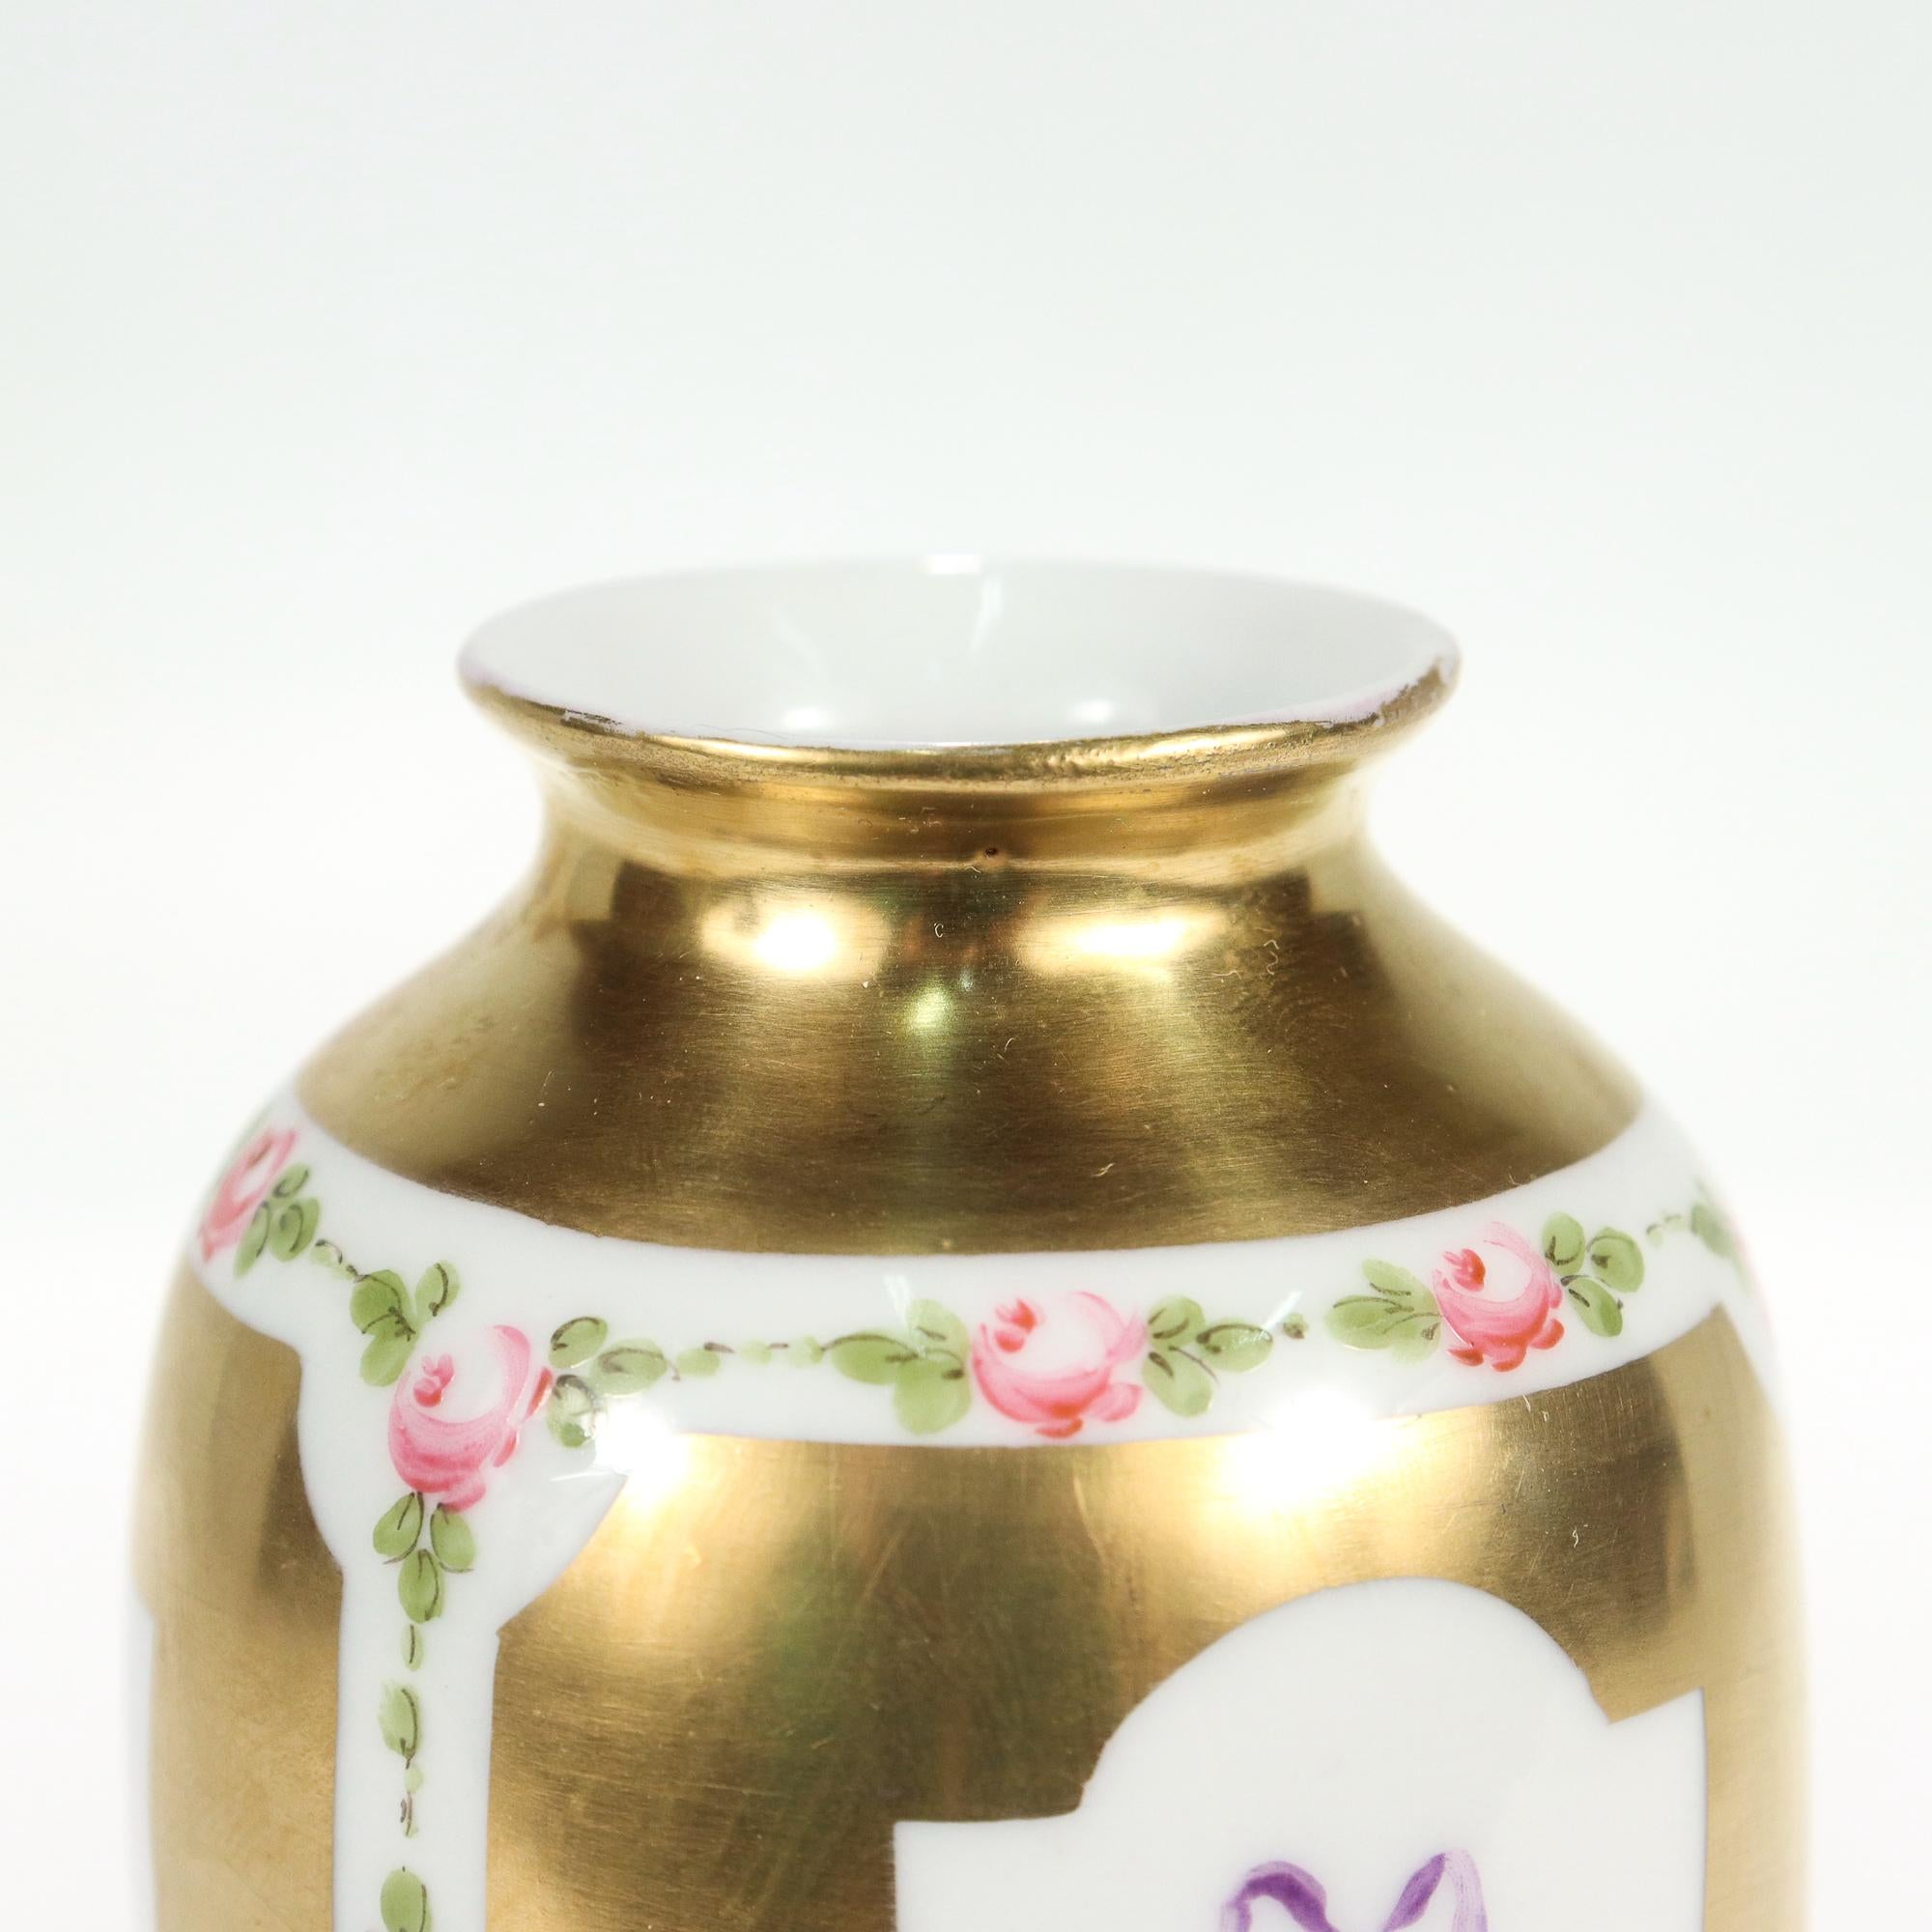 Old Sevres Type Gilt Porcelain Vase with Hand Painted Flower Baskets & Ribbons For Sale 6